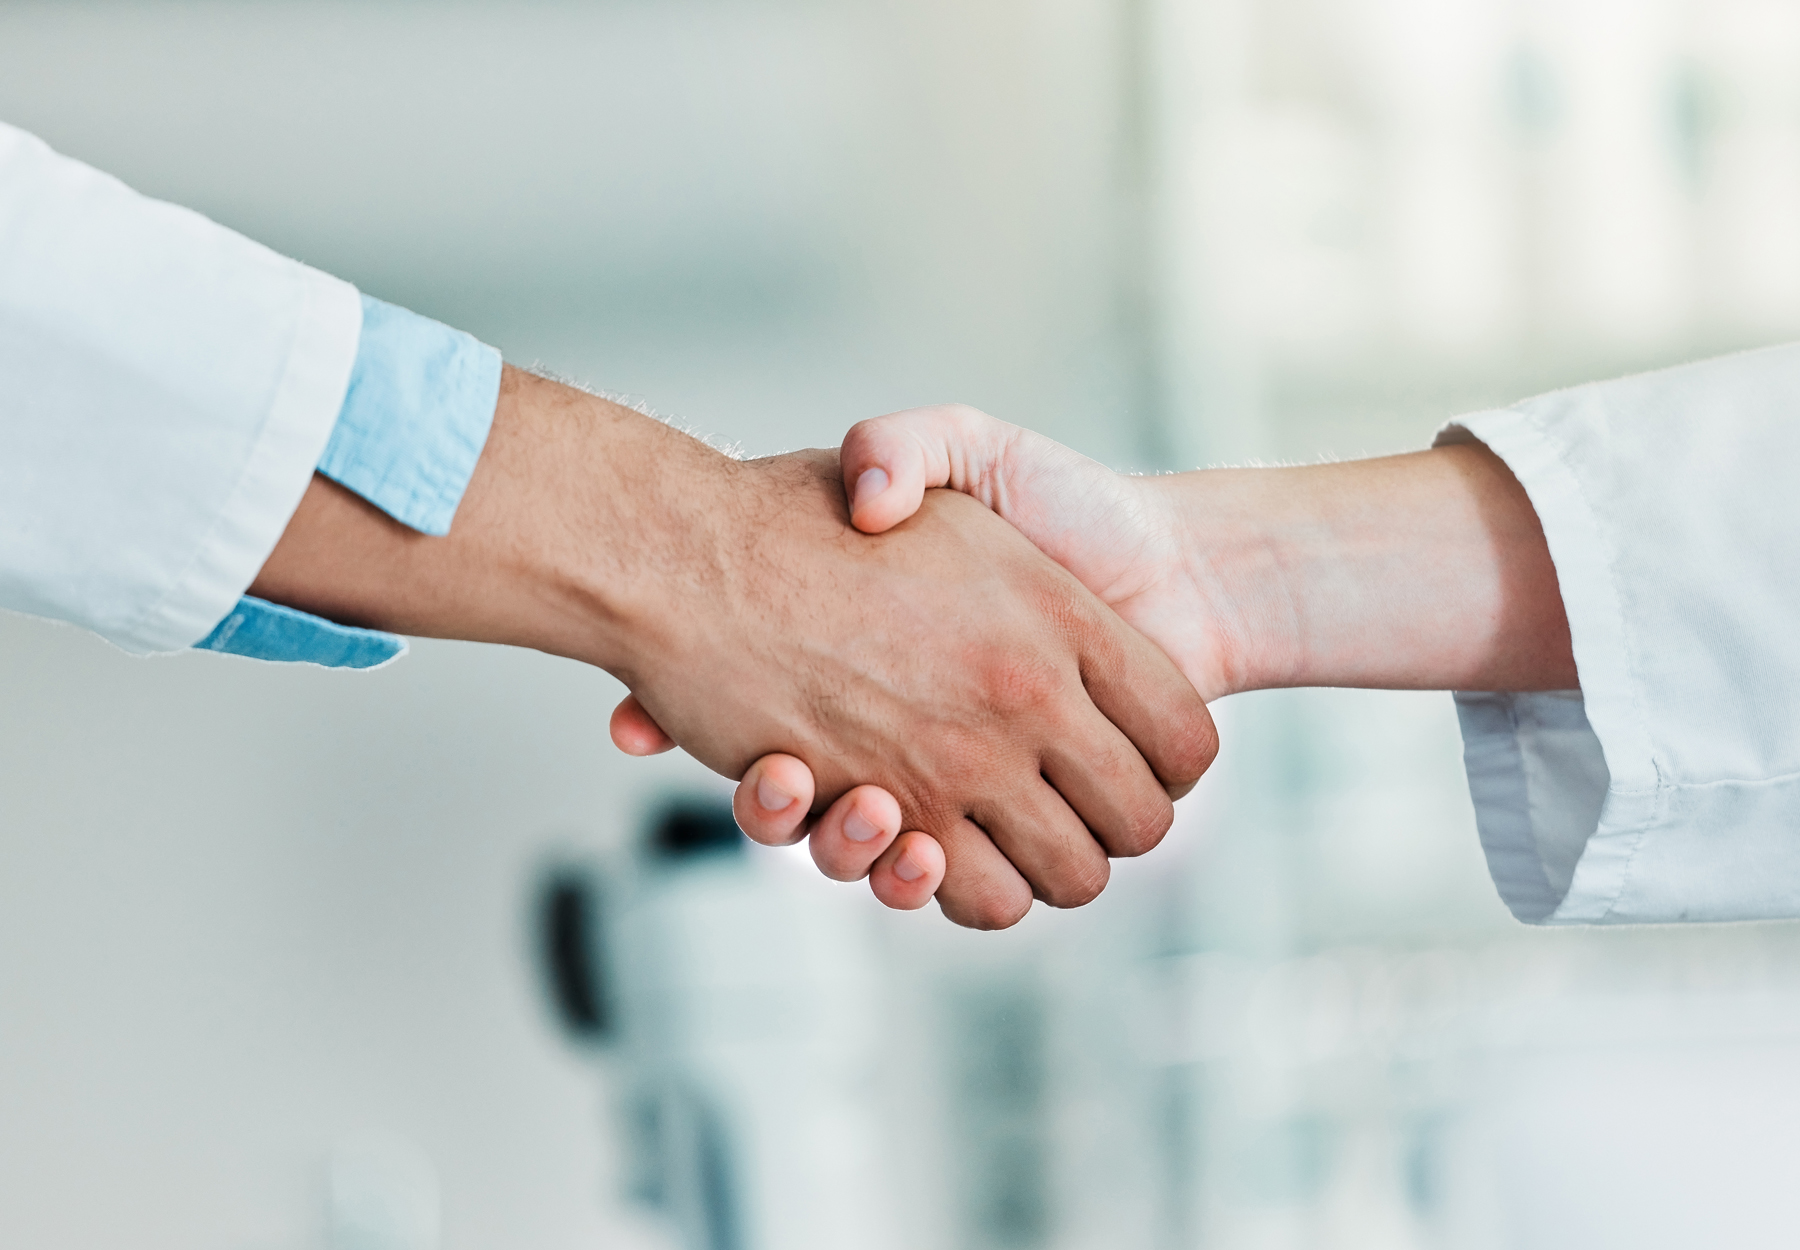 Closeup of two lab workers shaking hands. One hand has a white skin tone and one hand has a tan skin tone. Stock image.